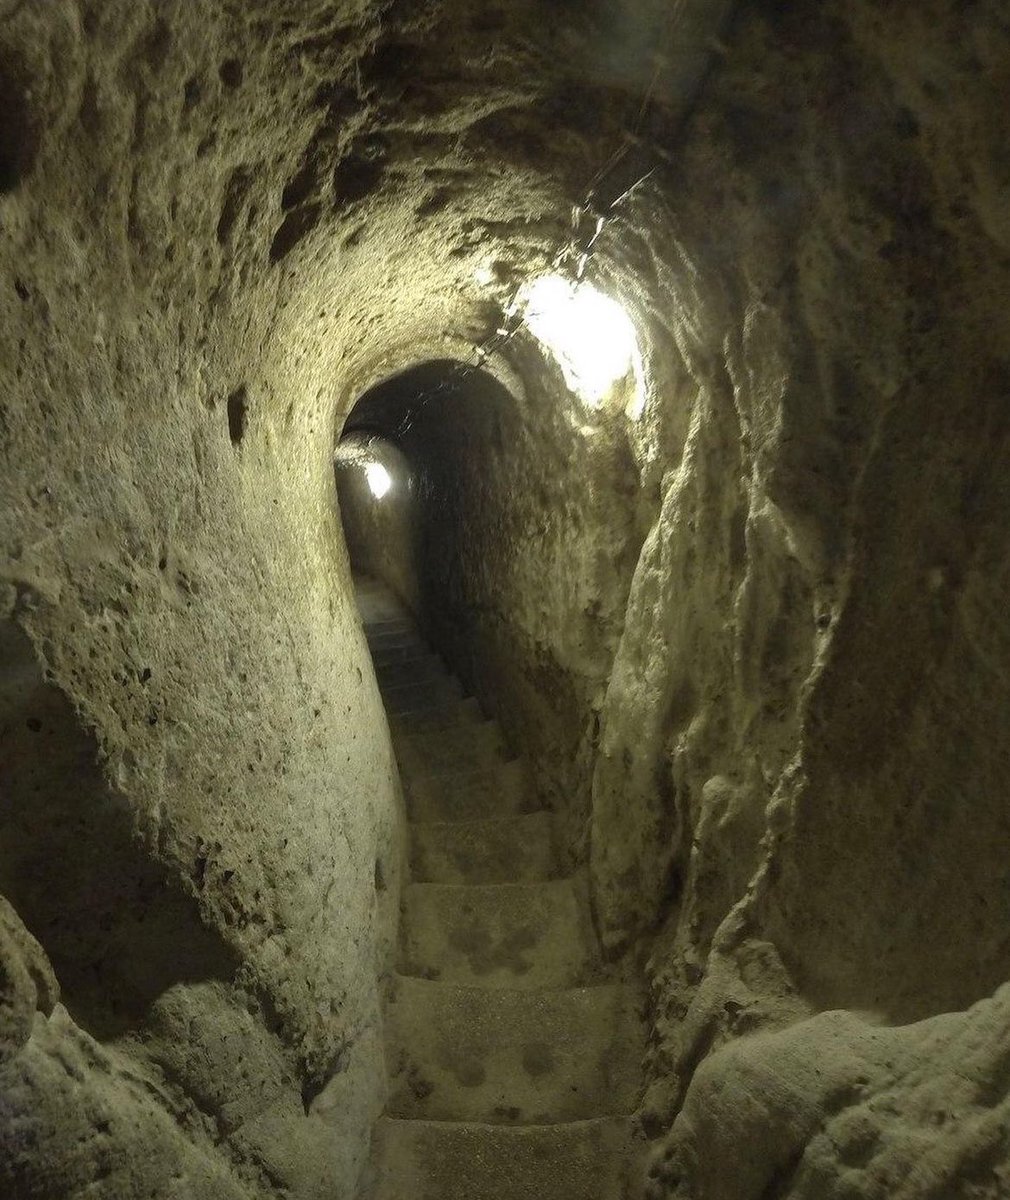 A Turkish homeowner chasing his chickens through a hole in his basement during renovations came across an abandoned underground Turkish city that once housed 20,000 people.

Excavation work uncovered an incredible marvel of engineering, a network of tunnels and shelters 18 levels